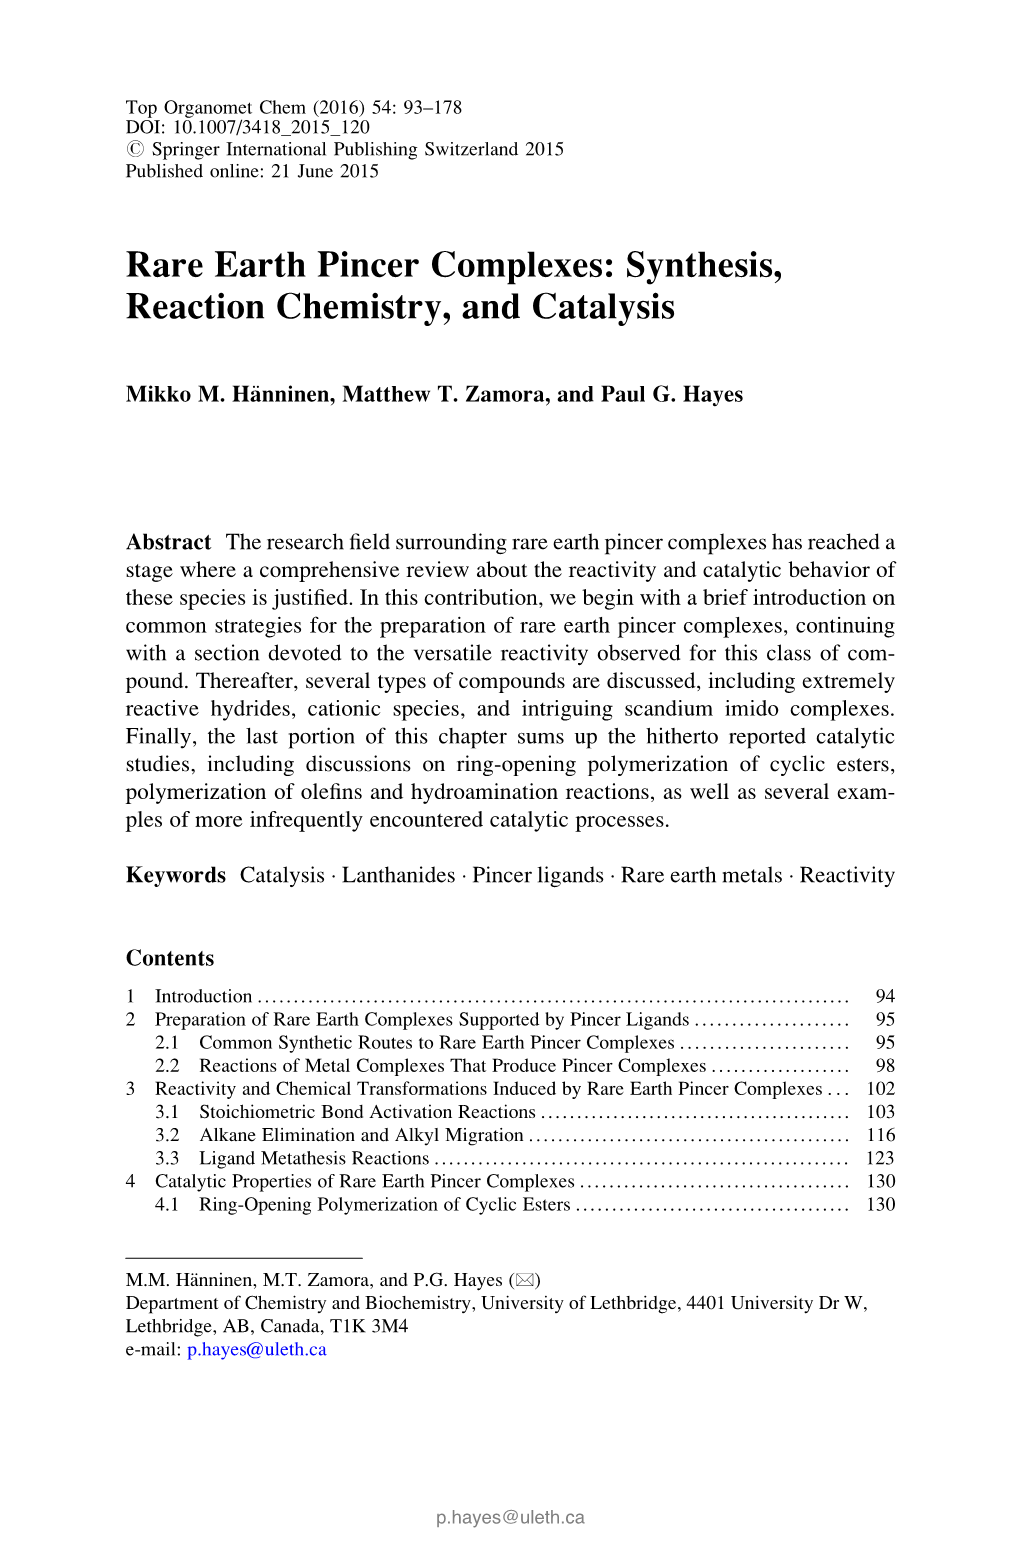 Rare Earth Pincer Complexes: Synthesis, Reaction Chemistry, and Catalysis